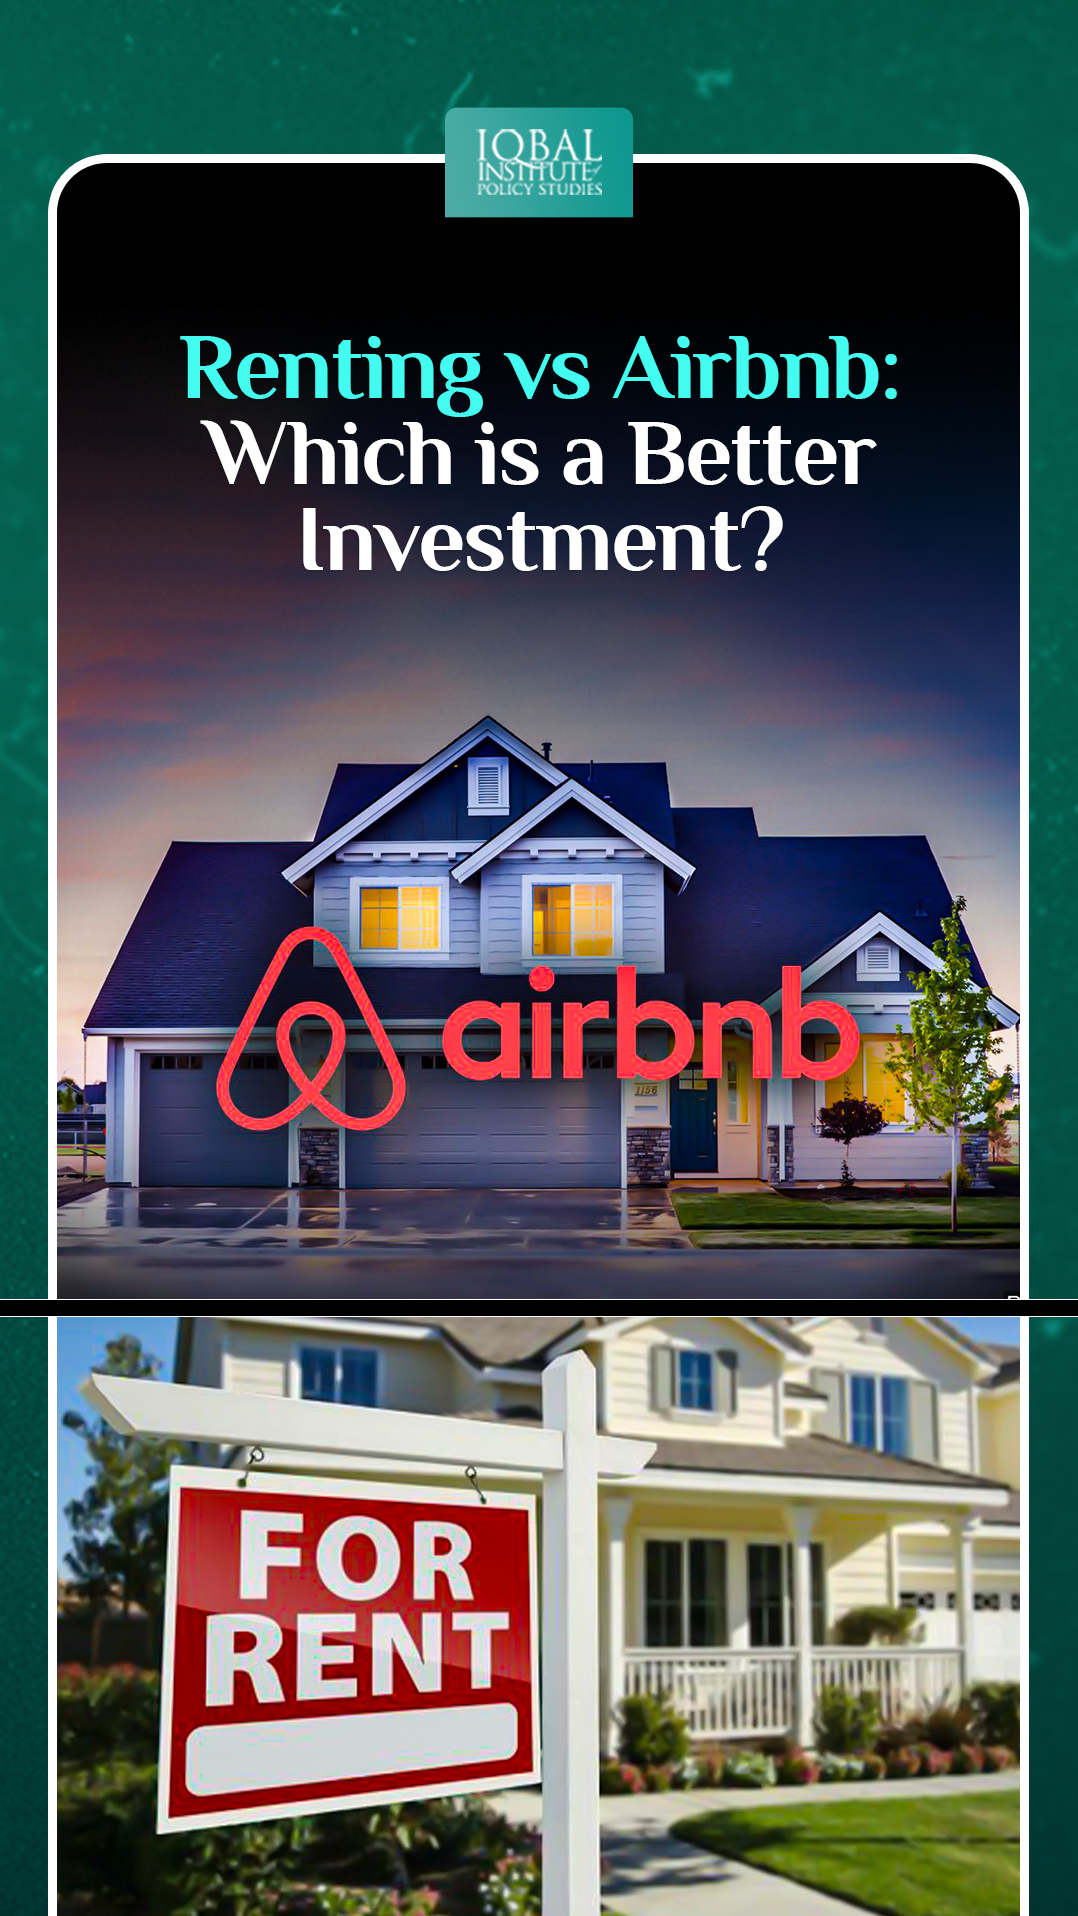 Renting vs Airbnb: Which is a Better Investment?